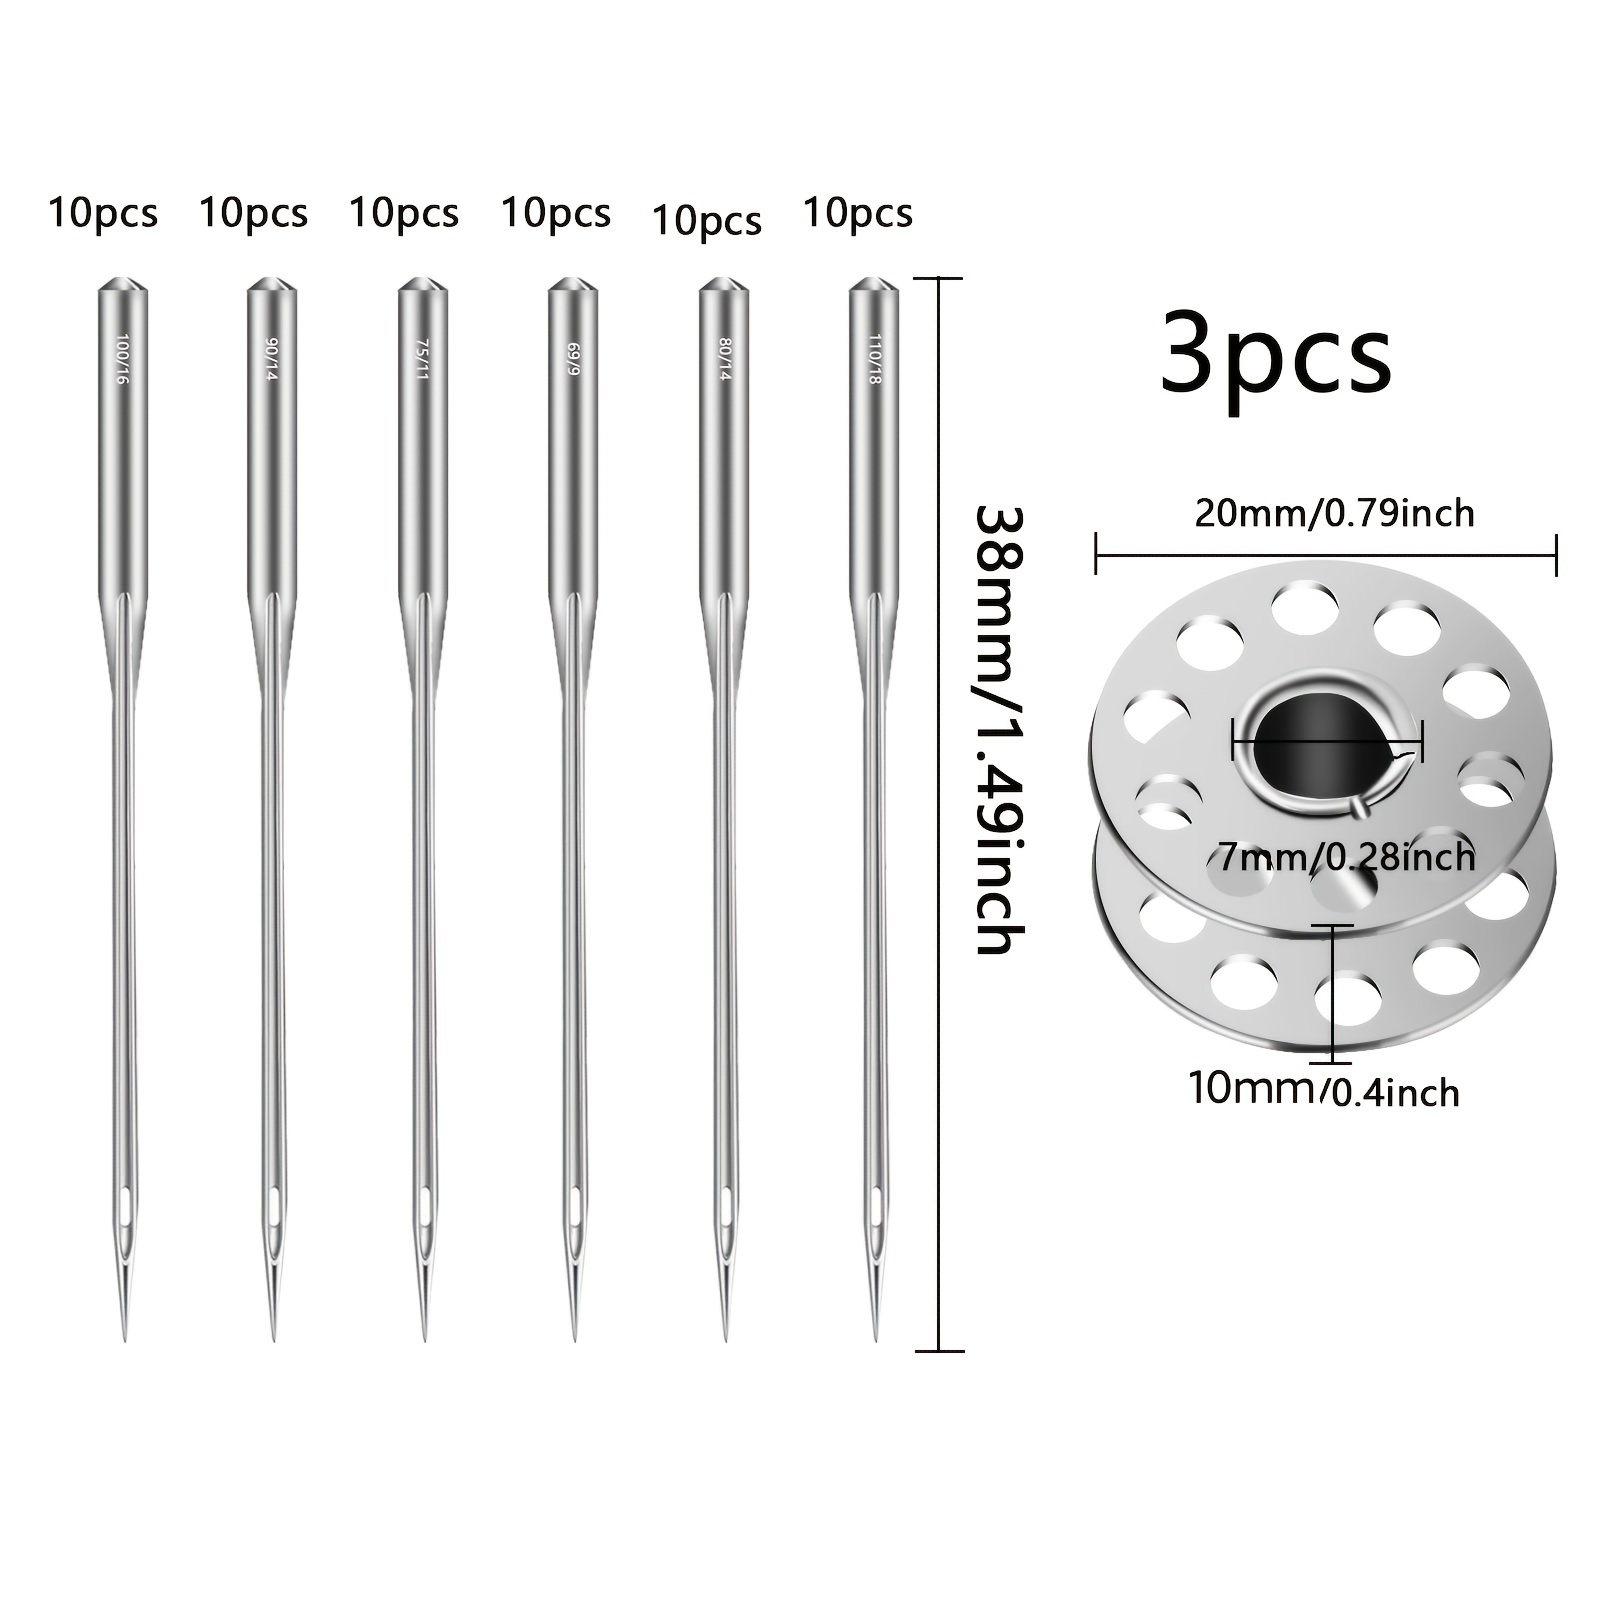  10Pcs Triangle Sewing Needles Large Eye for Fabric-Sewing  Needle for Leather-Sewing Needles for Sewing Machine-Sewing Needle for  Thick Fabric-Leather Accessories Crafts (Small)